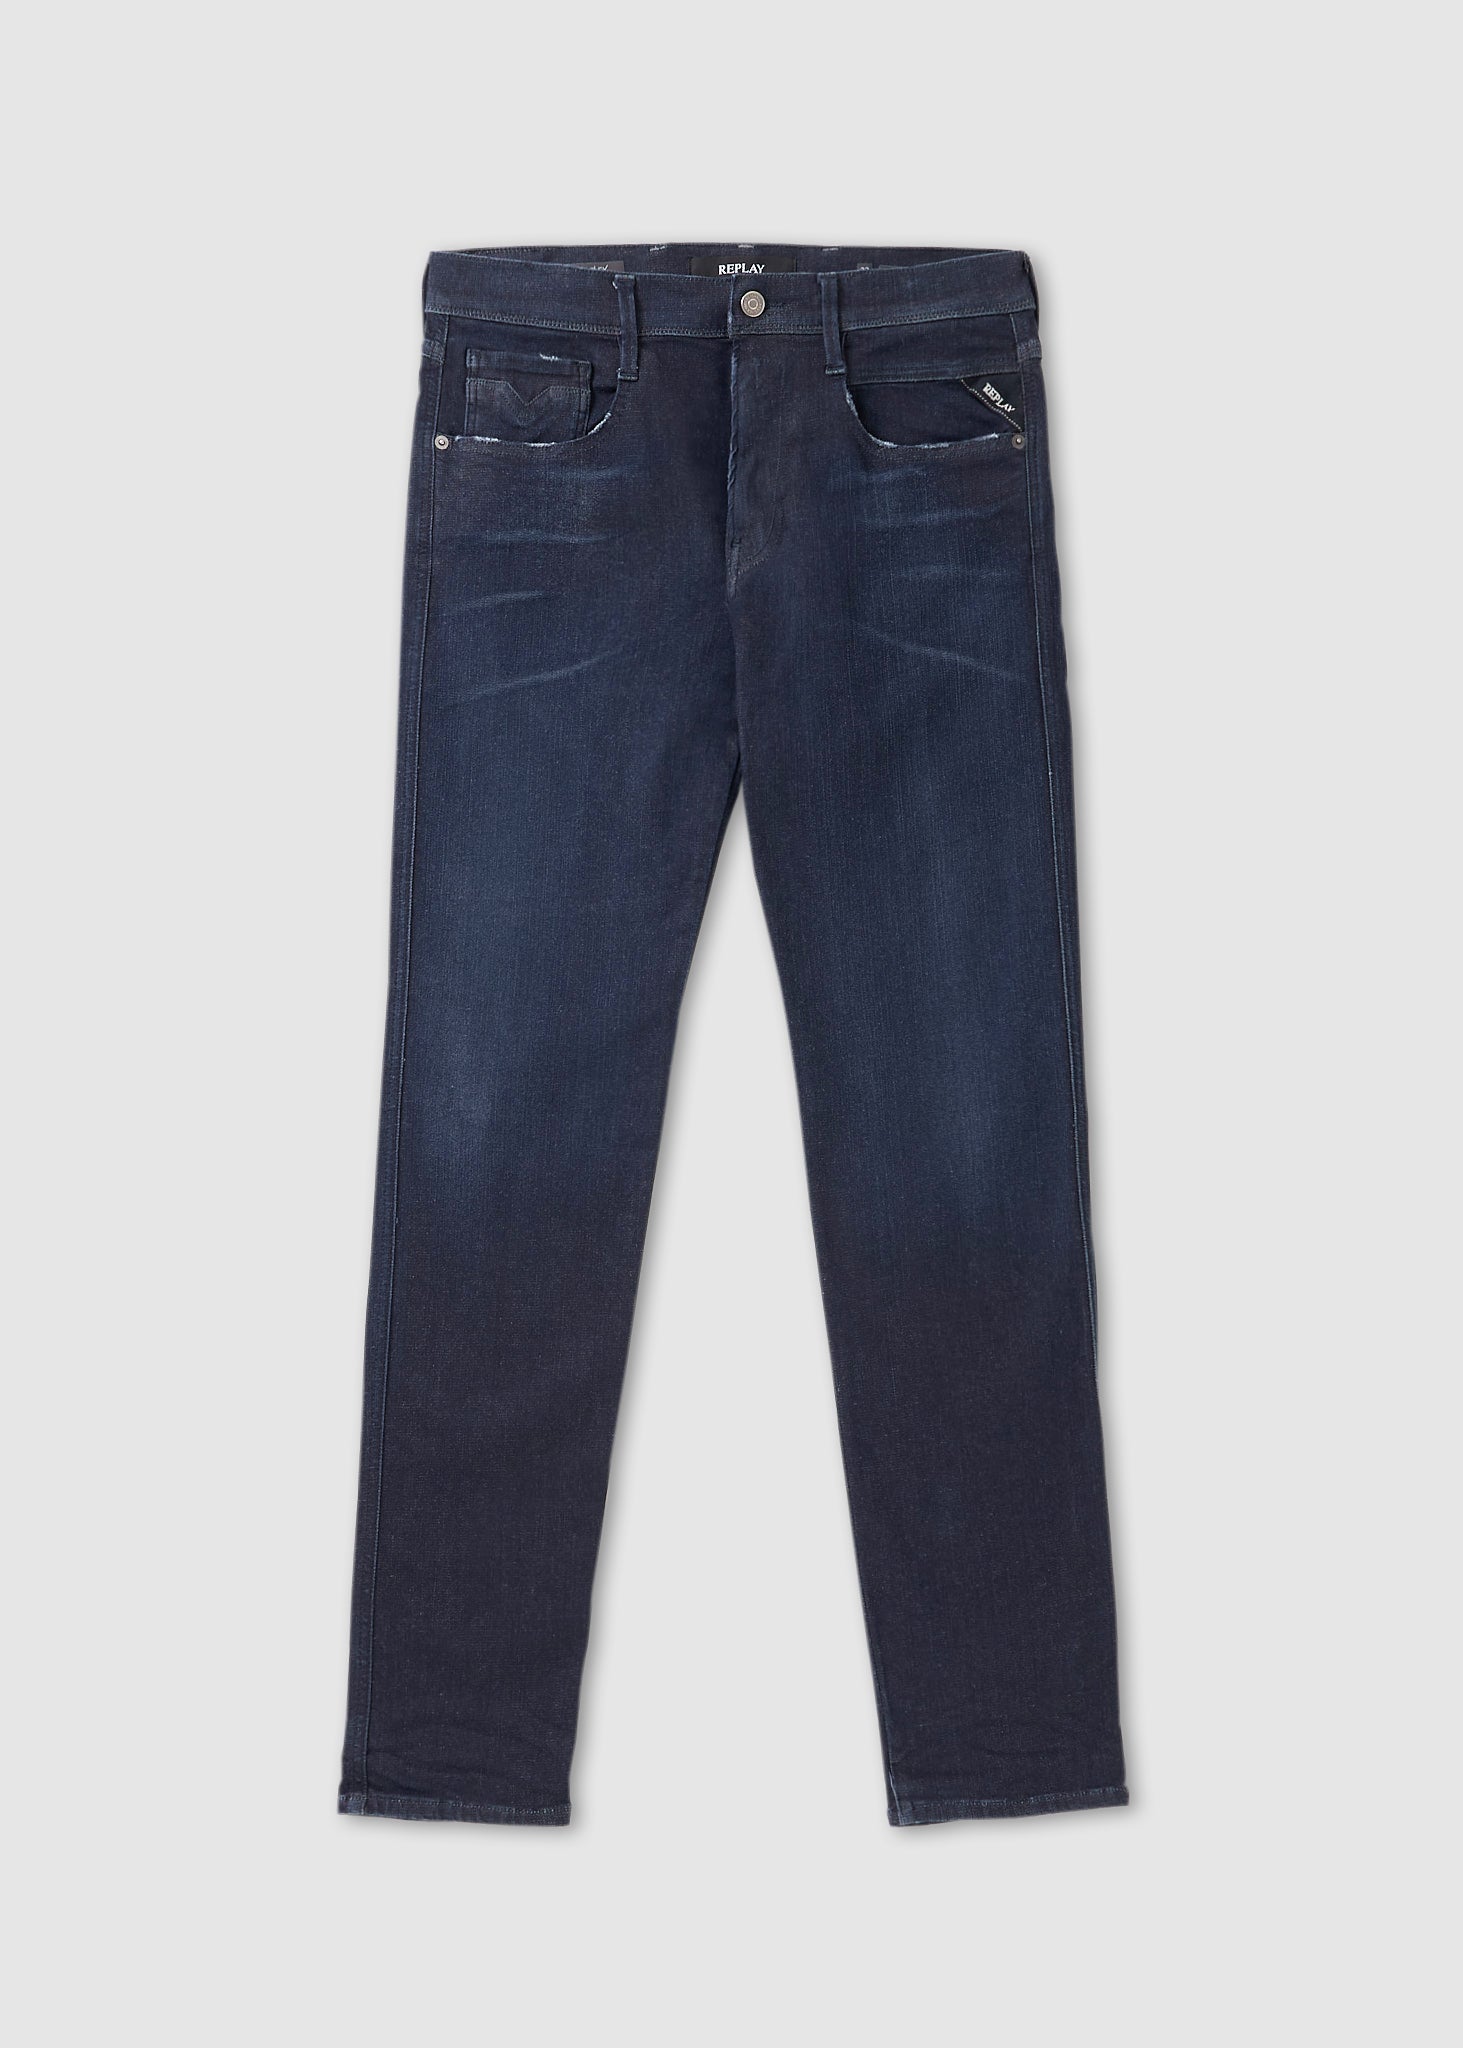 Image of Replay Mens Anbass Hyperflex Cloud Jeans In Navy